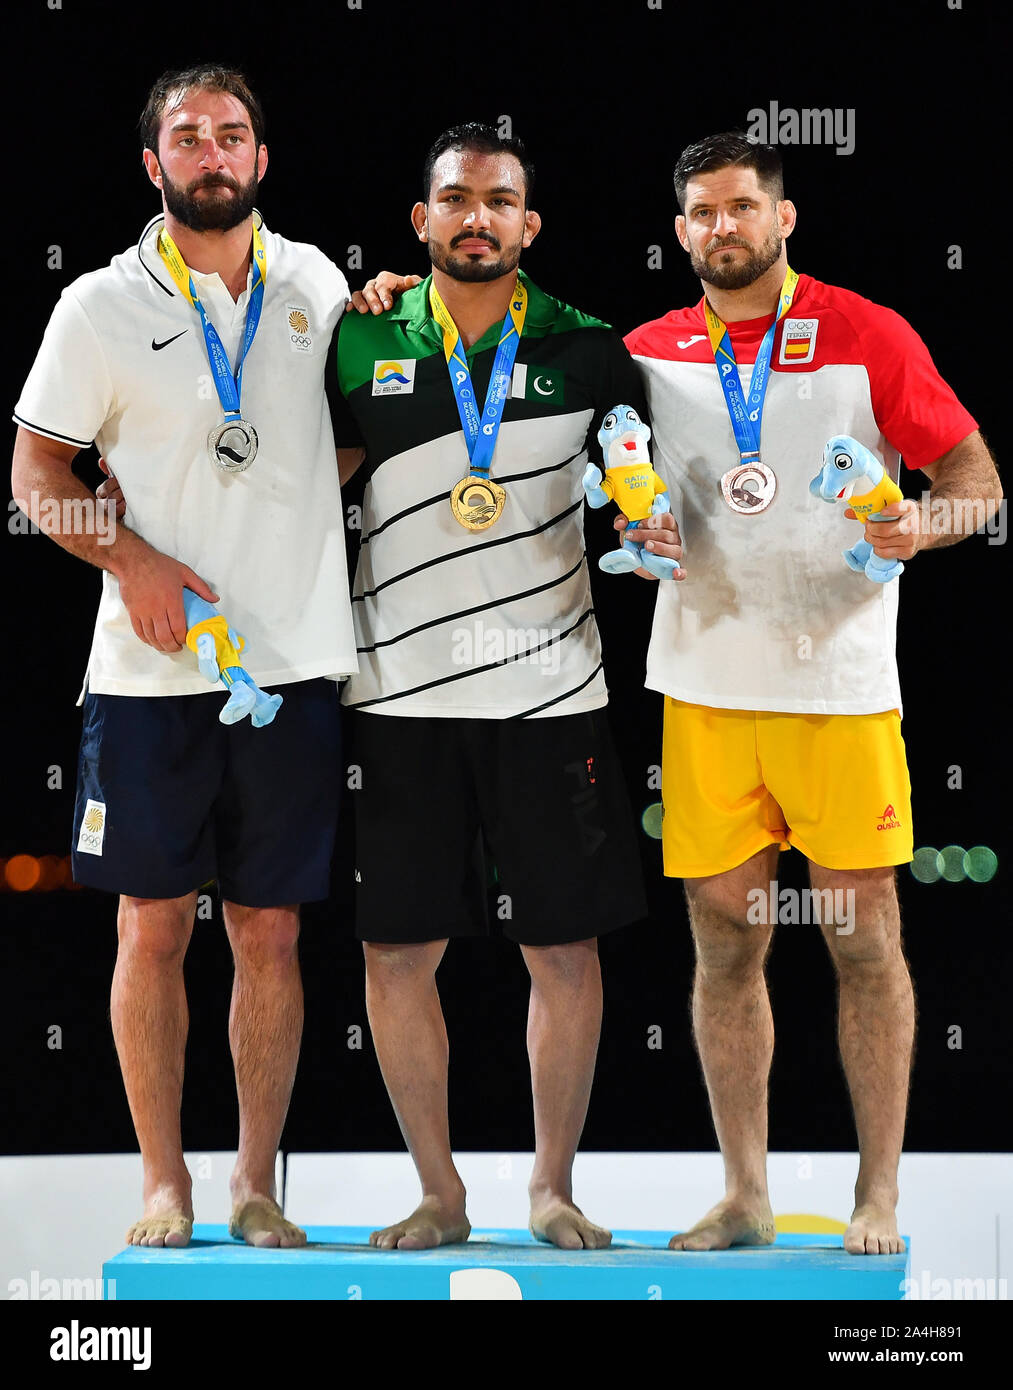 Doha, Qatar. 14th Oct, 2019. Gold medalist Muhammad Inam (C) of Pakistan, silver medalist Dato Marsagishvili (L) of Georgia and bronze medalist Pedro Jacinto Garcia Perez of Spain pose for photos during the awarding ceremony of the men's Beach Wrestling 90KG at the 1st ANOC World Beach Games Qatar 2019 in Doha, capital of Qatar, on Oct. 14, 2019. Credit: Nikku/Xinhua/Alamy Live News Stock Photo